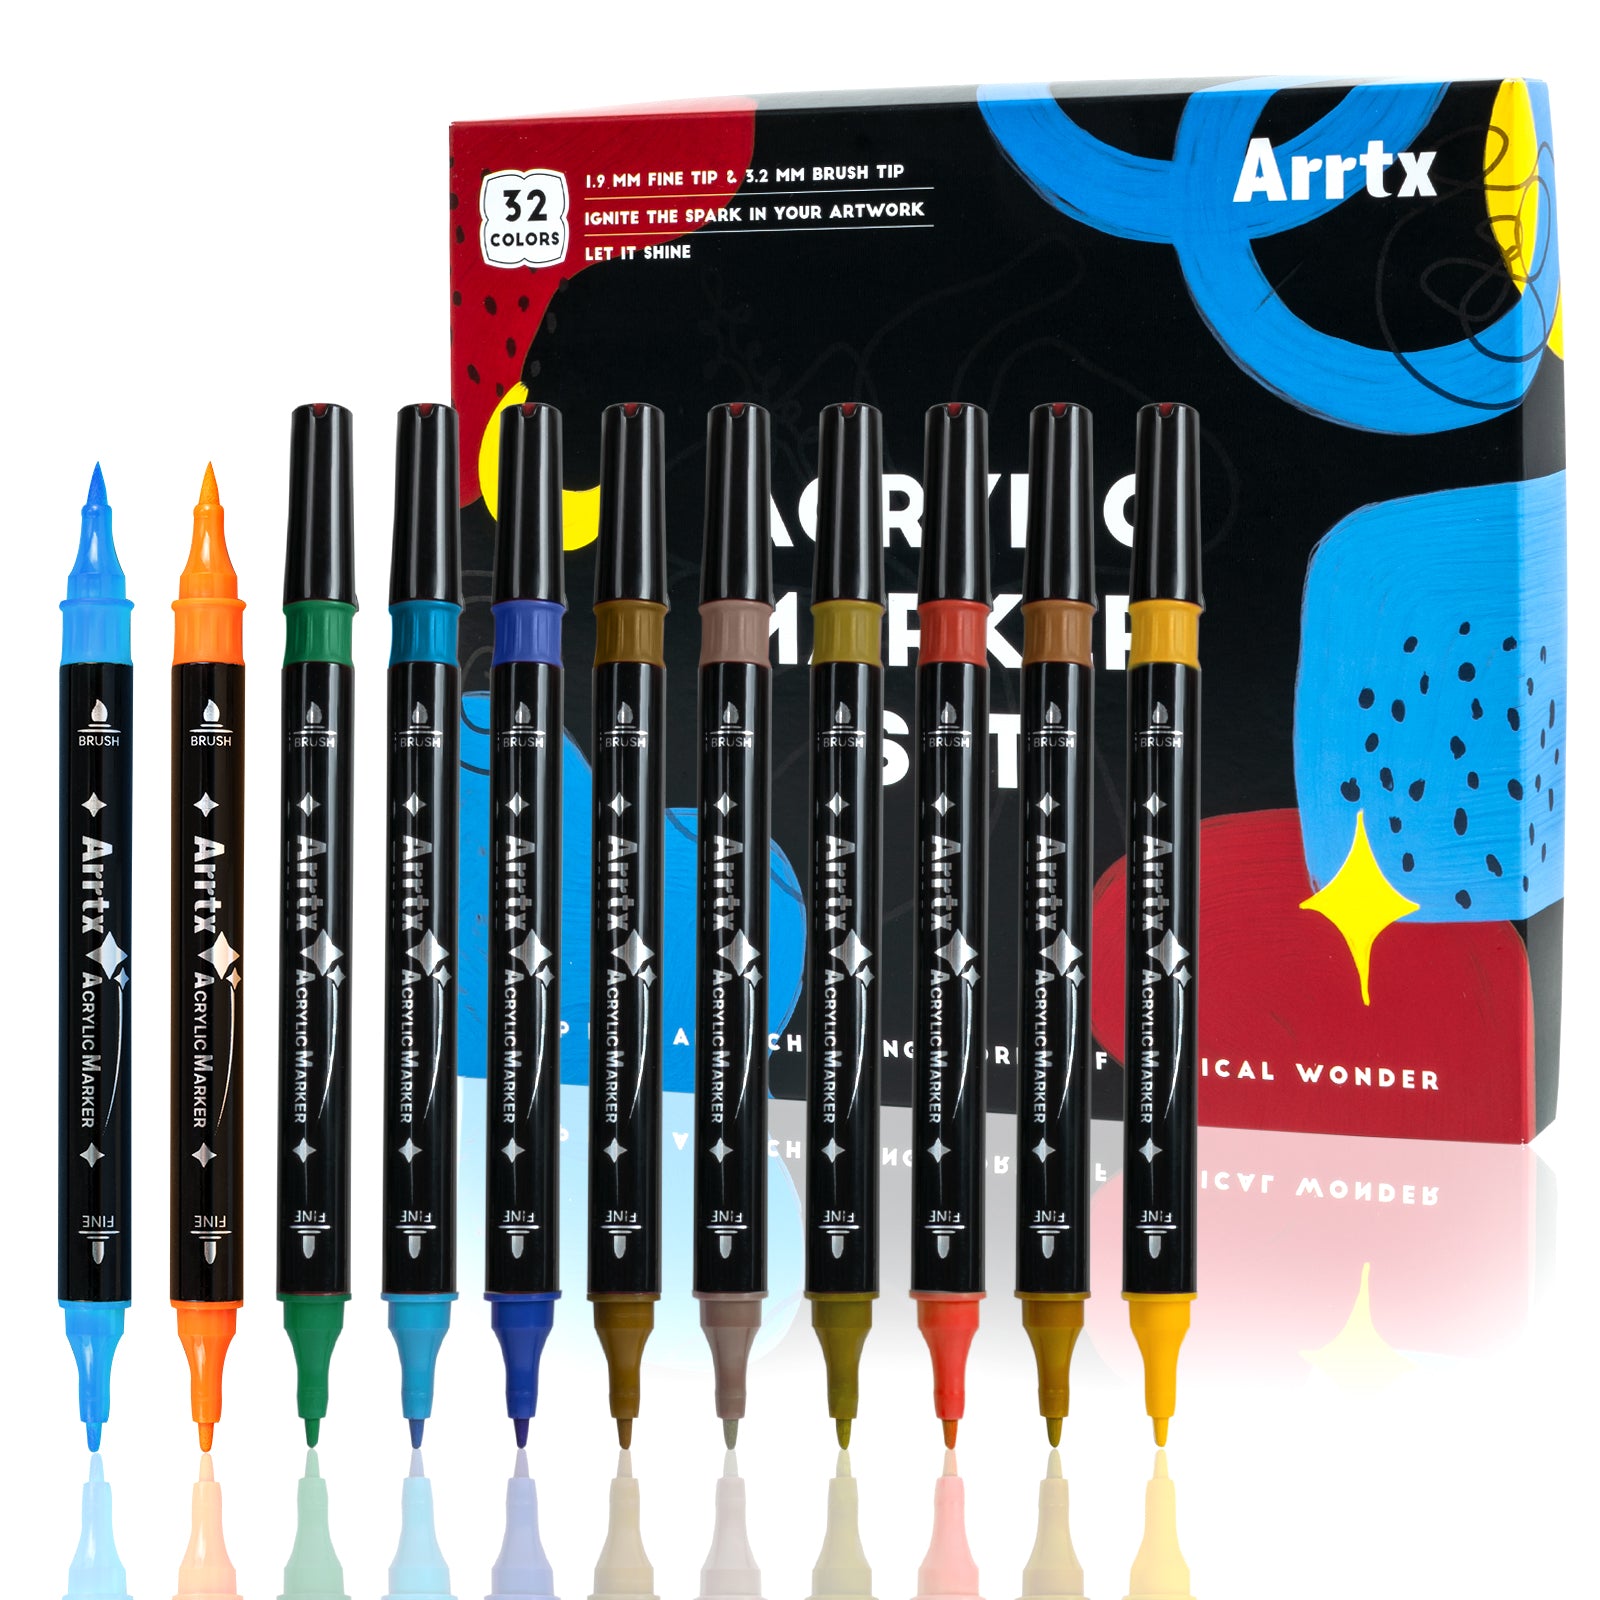 Arrtx 32 Colors Acrylic Marker, Brush Tip and Fine Tip (Dual Tip)